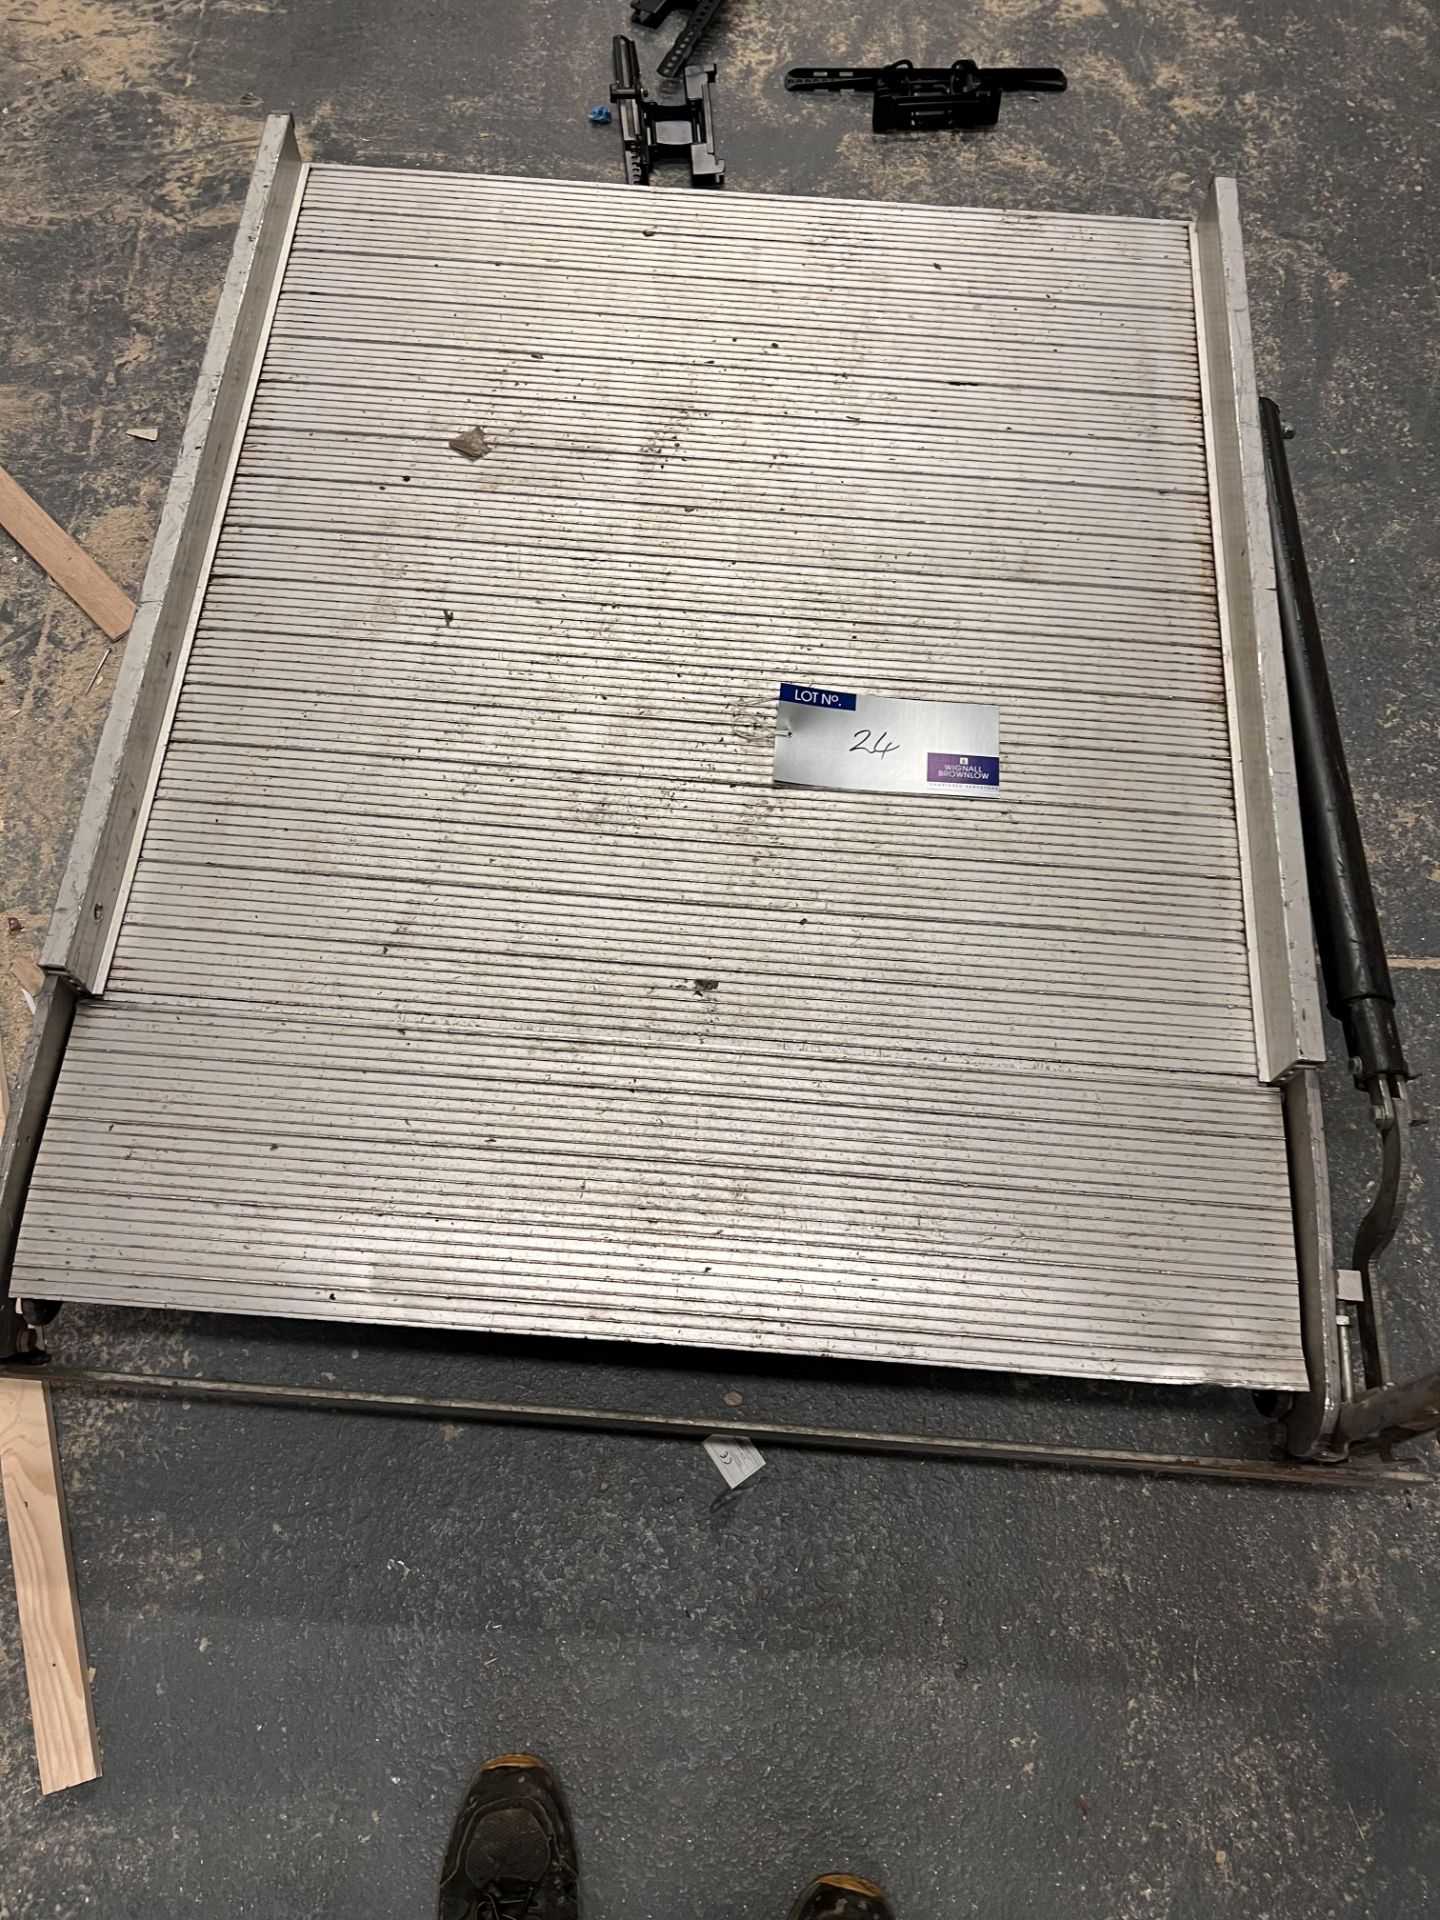 A WM AL300 Folding Van Ramp for Sprinter, 350KG weight limit, bolts missing for floor fixing to